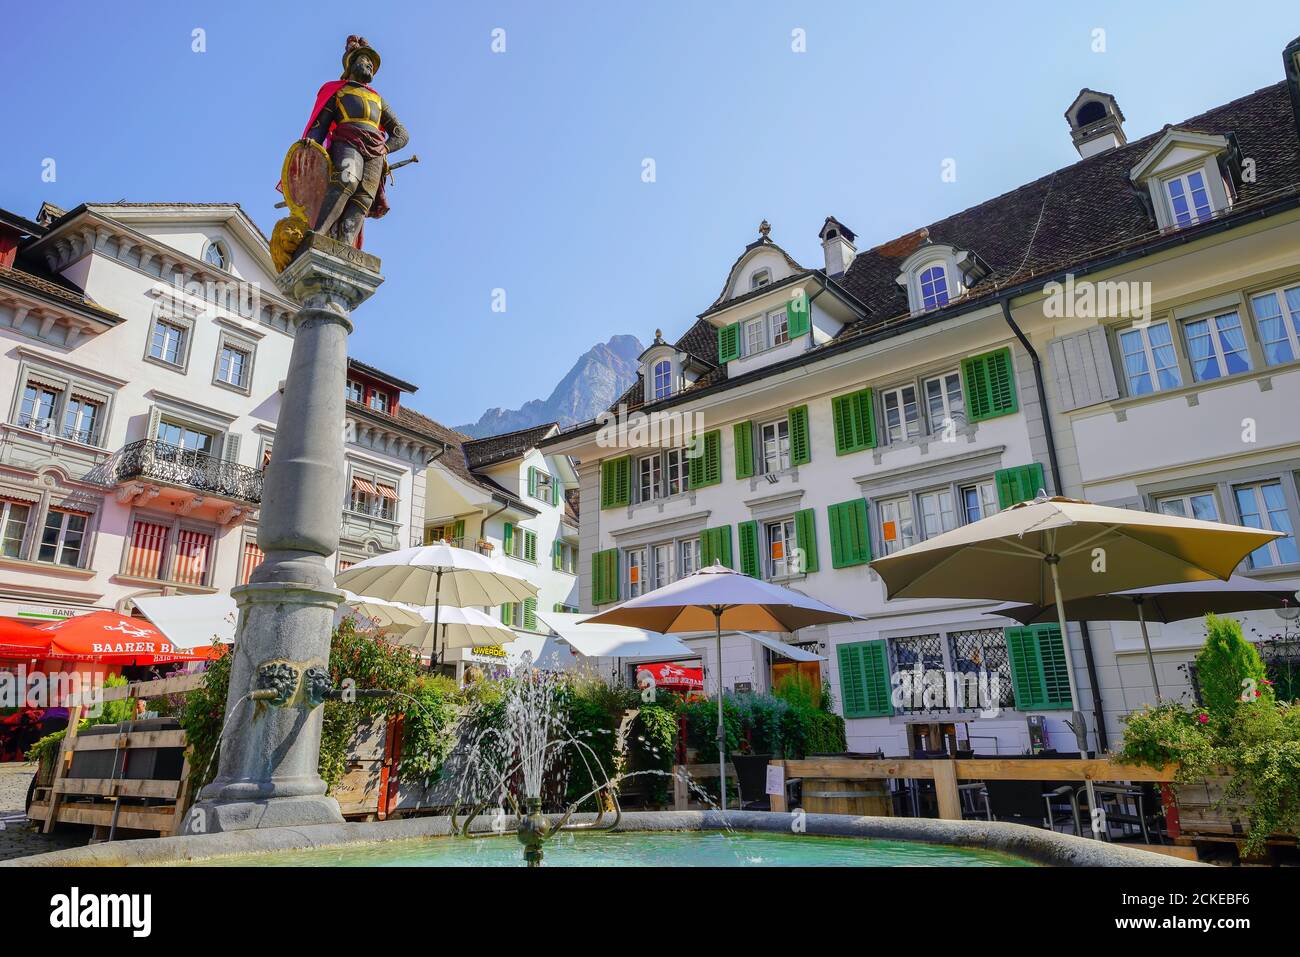 Fountain (Brunnen-Mandl)  in the central plaza in Schwyz. The medieval town  Schwyz is the capital of the canton of Schwyz in Switzerland. The Federa Stock Photo